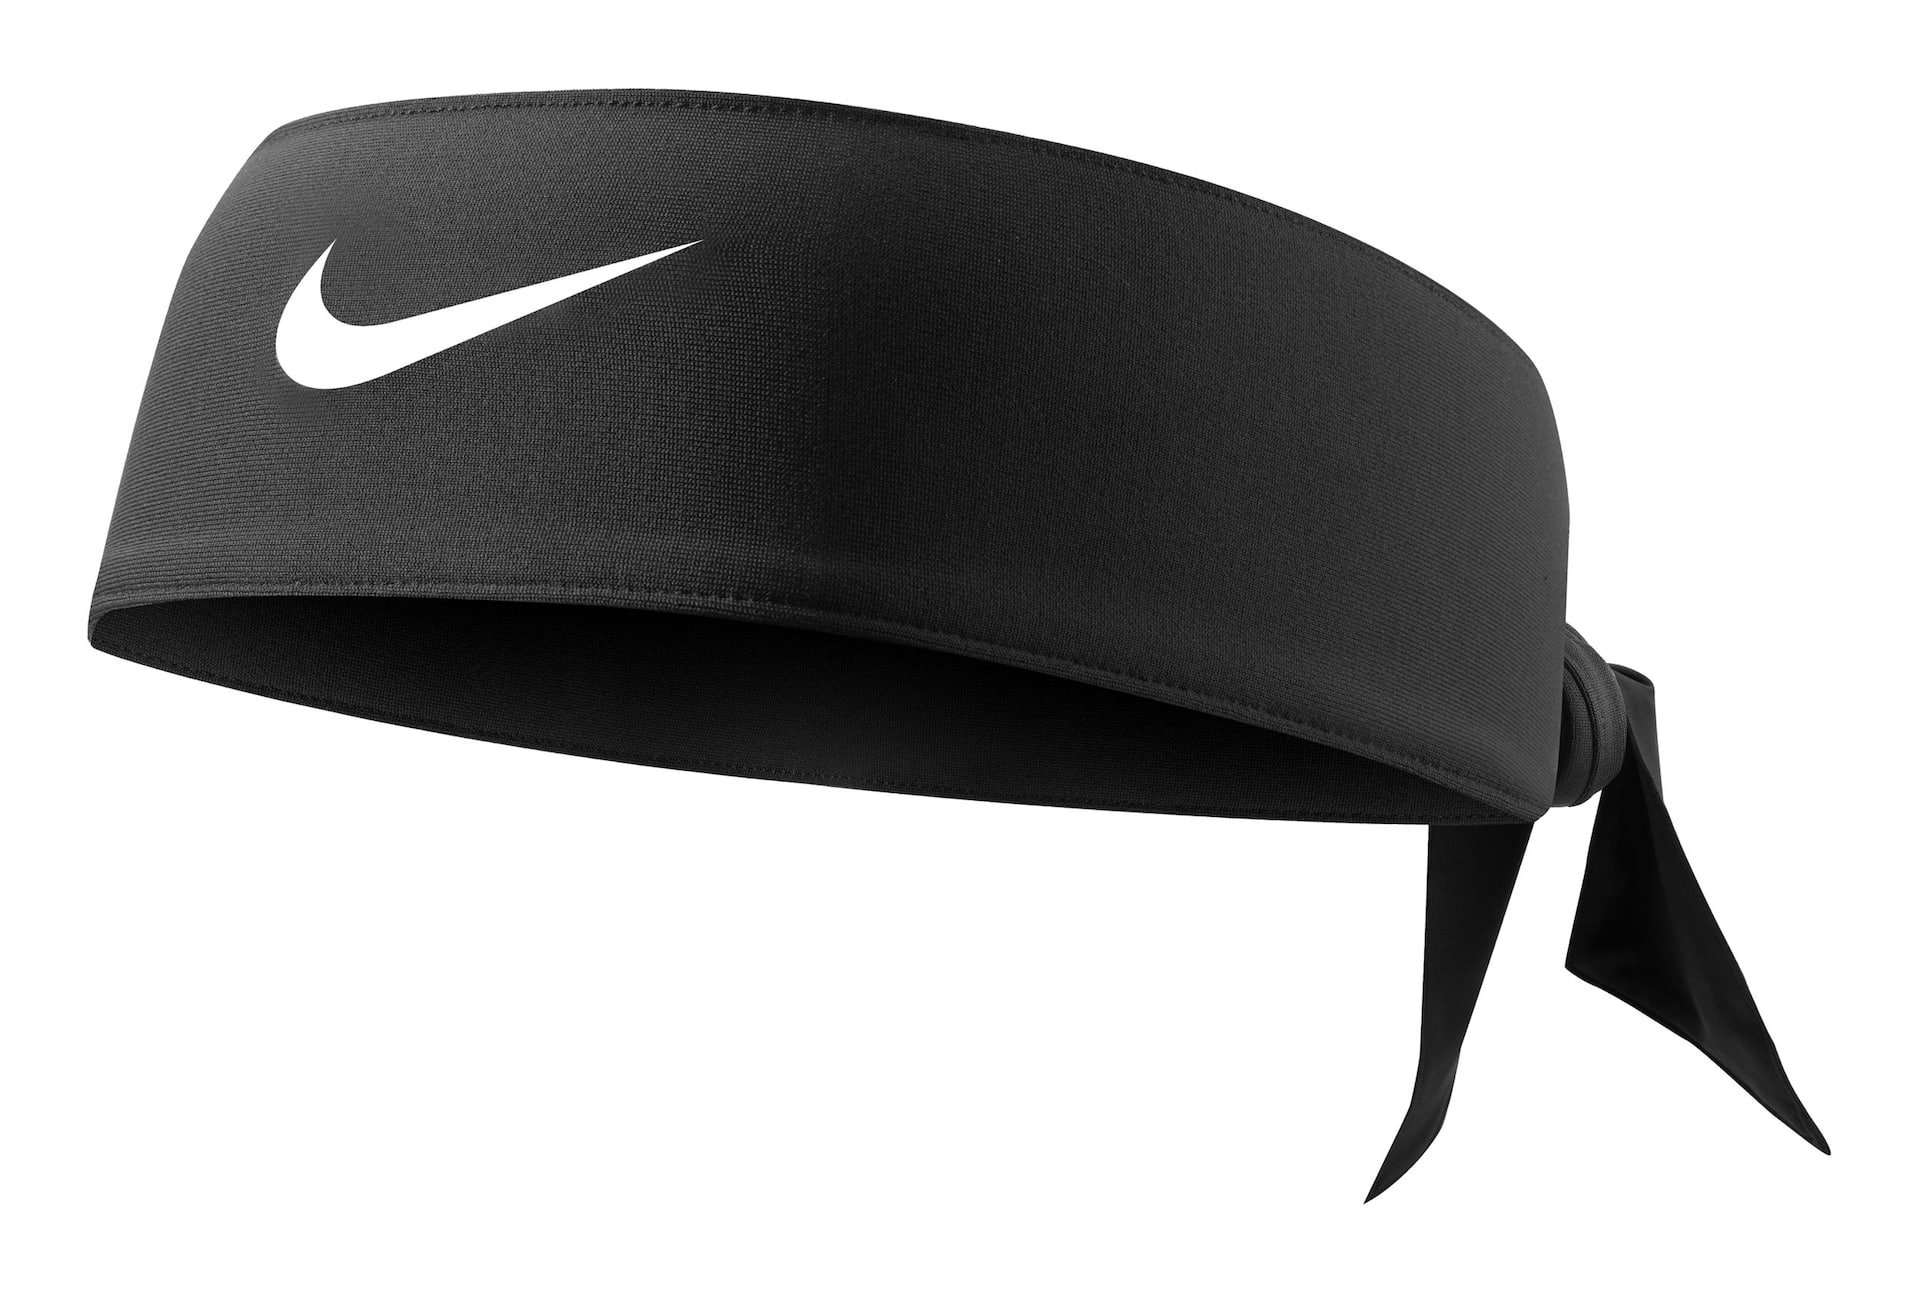 Best price for NIKE Dri-FIT ADV Fly Cap U AB Reflective (Headbands and caps), Trakks Outdoor at TraKKs eShop, the Running and Outdoor specialist